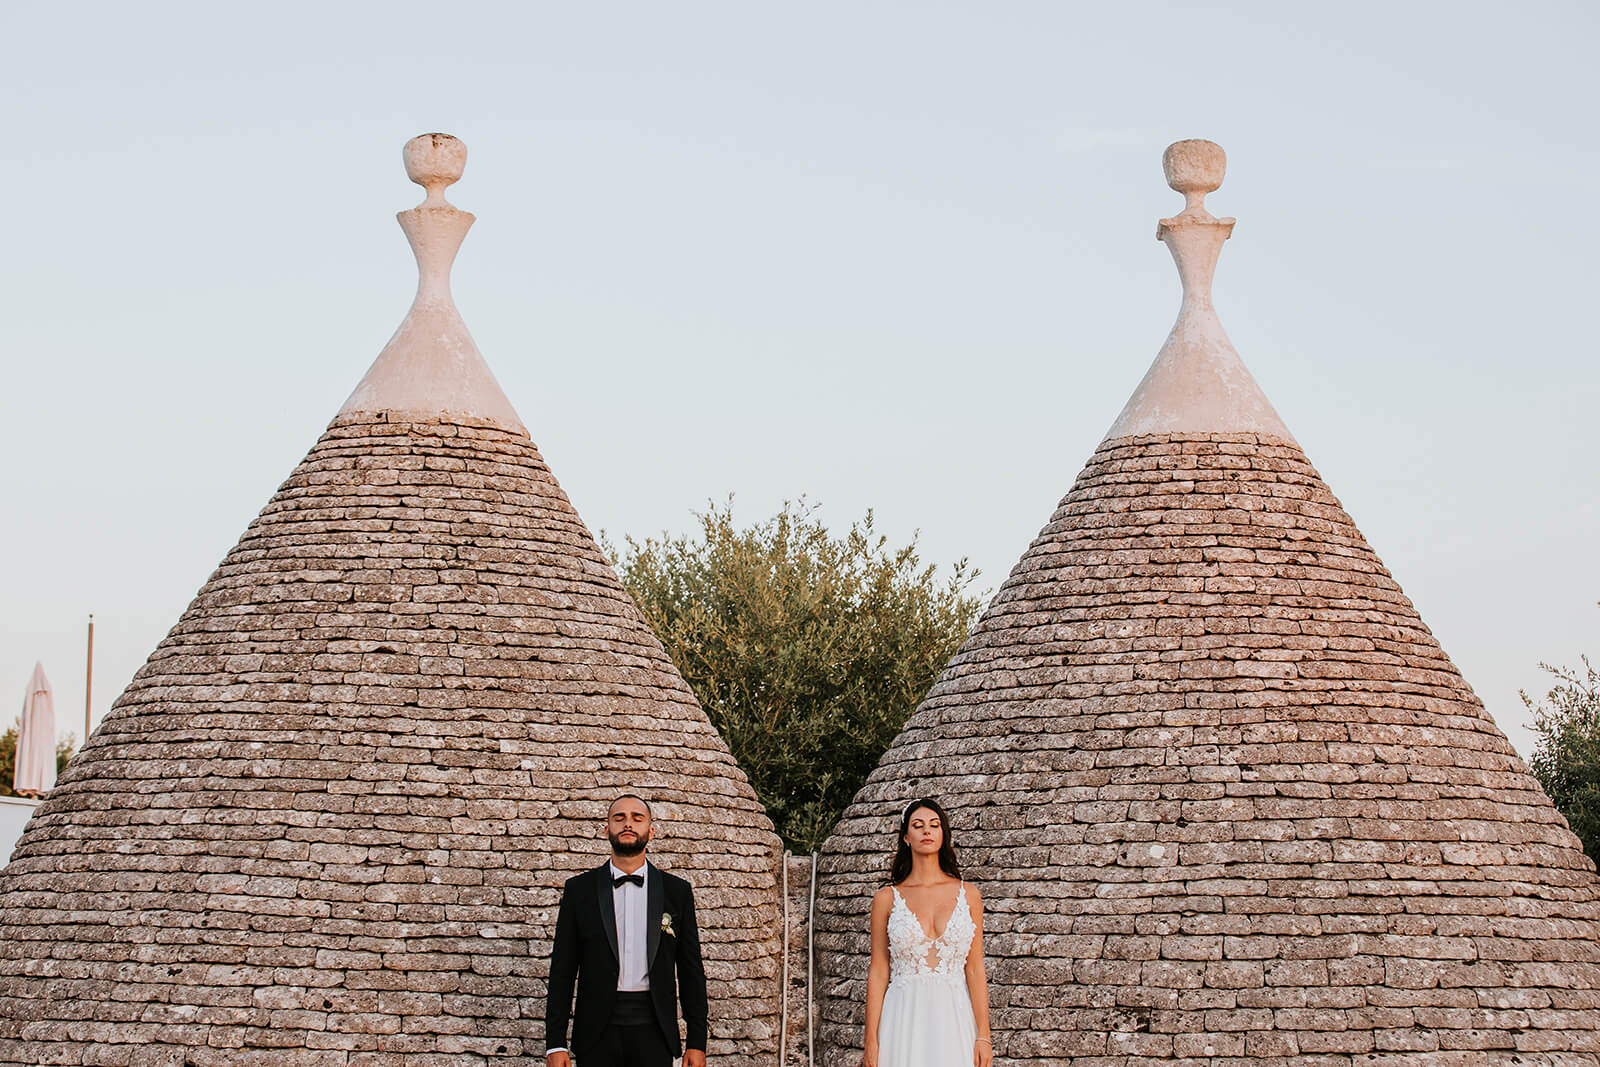 Adventure Elopement in Southern Italy